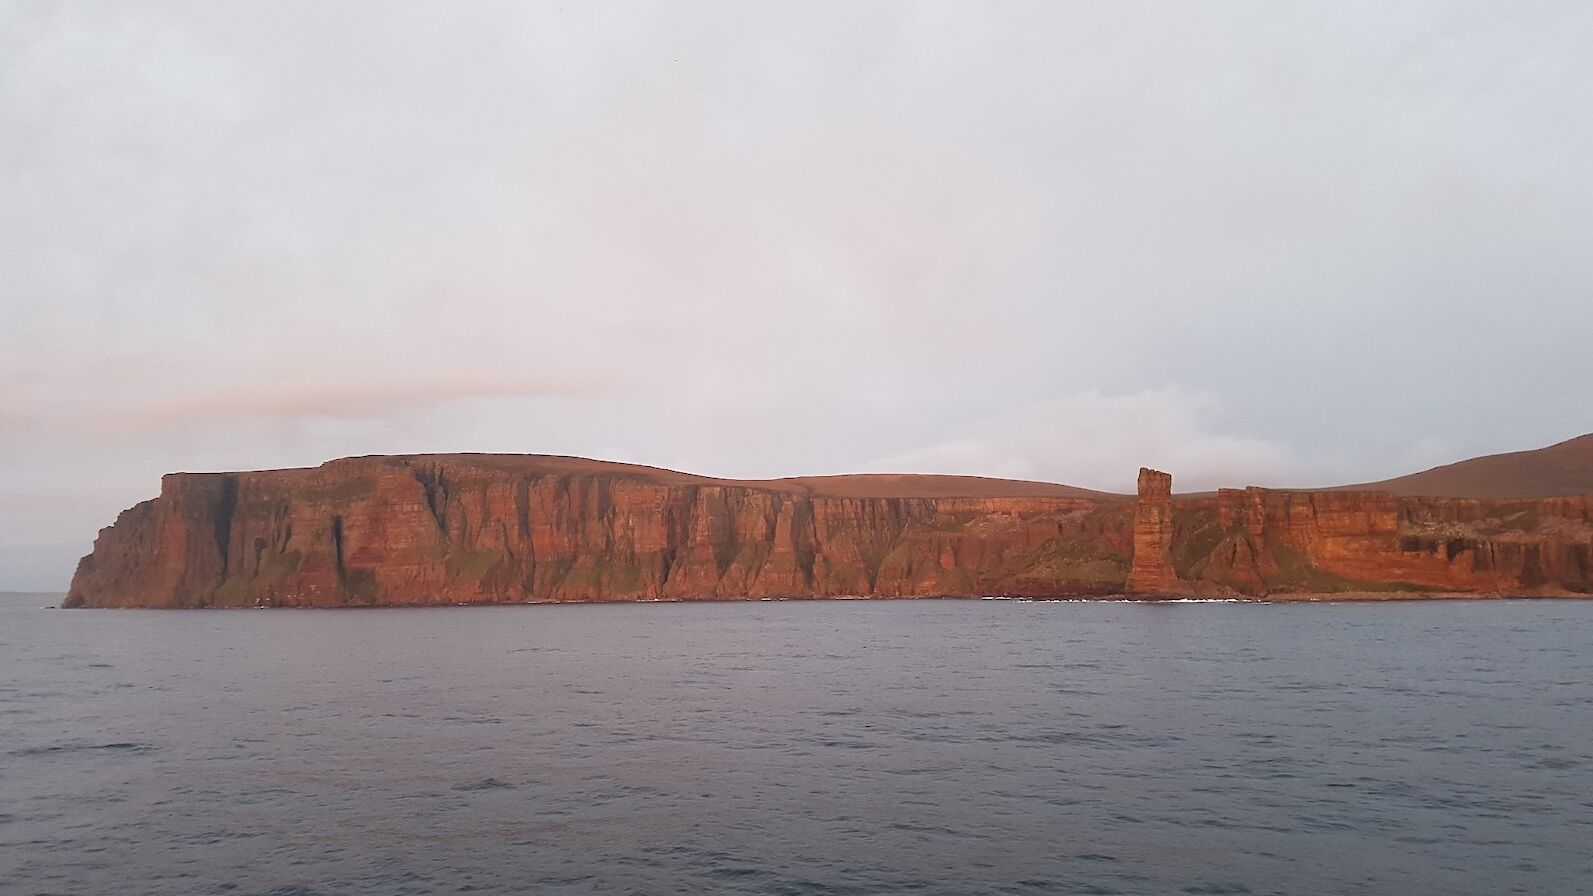 The Old Man of Hoy - image by Richy Ainsworth